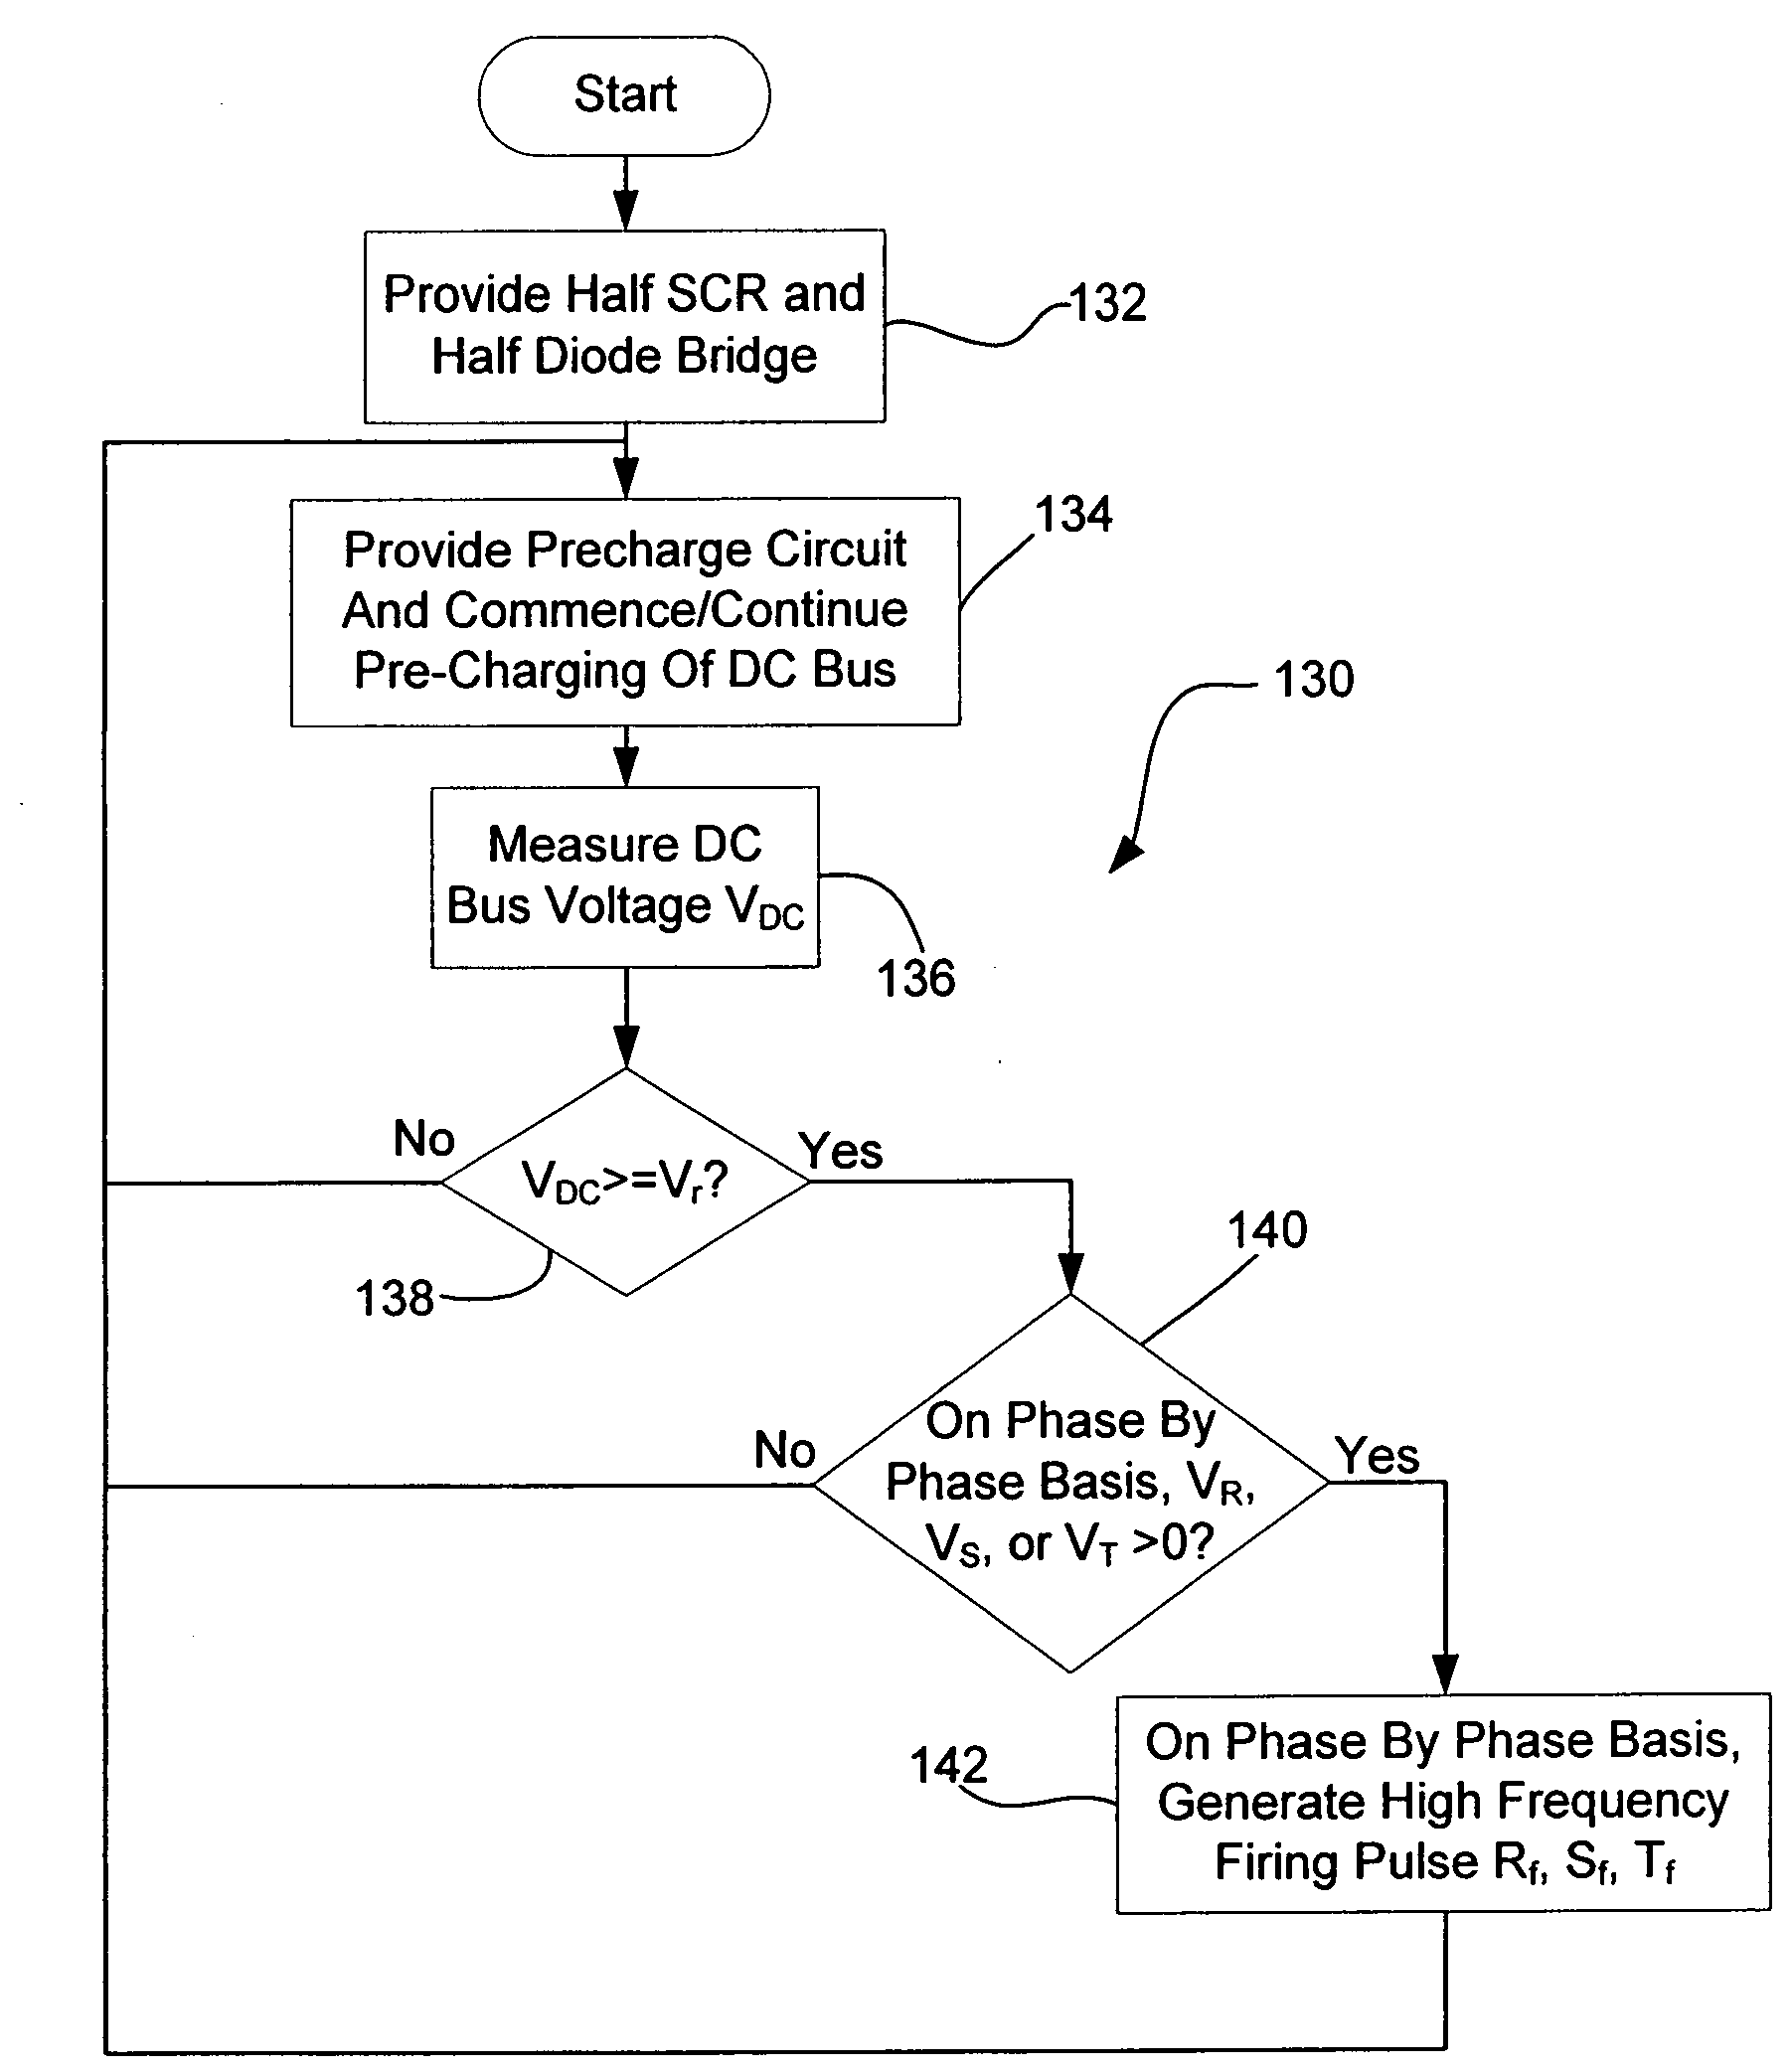 Method and apparatus for DC bus capacitor pre-charge